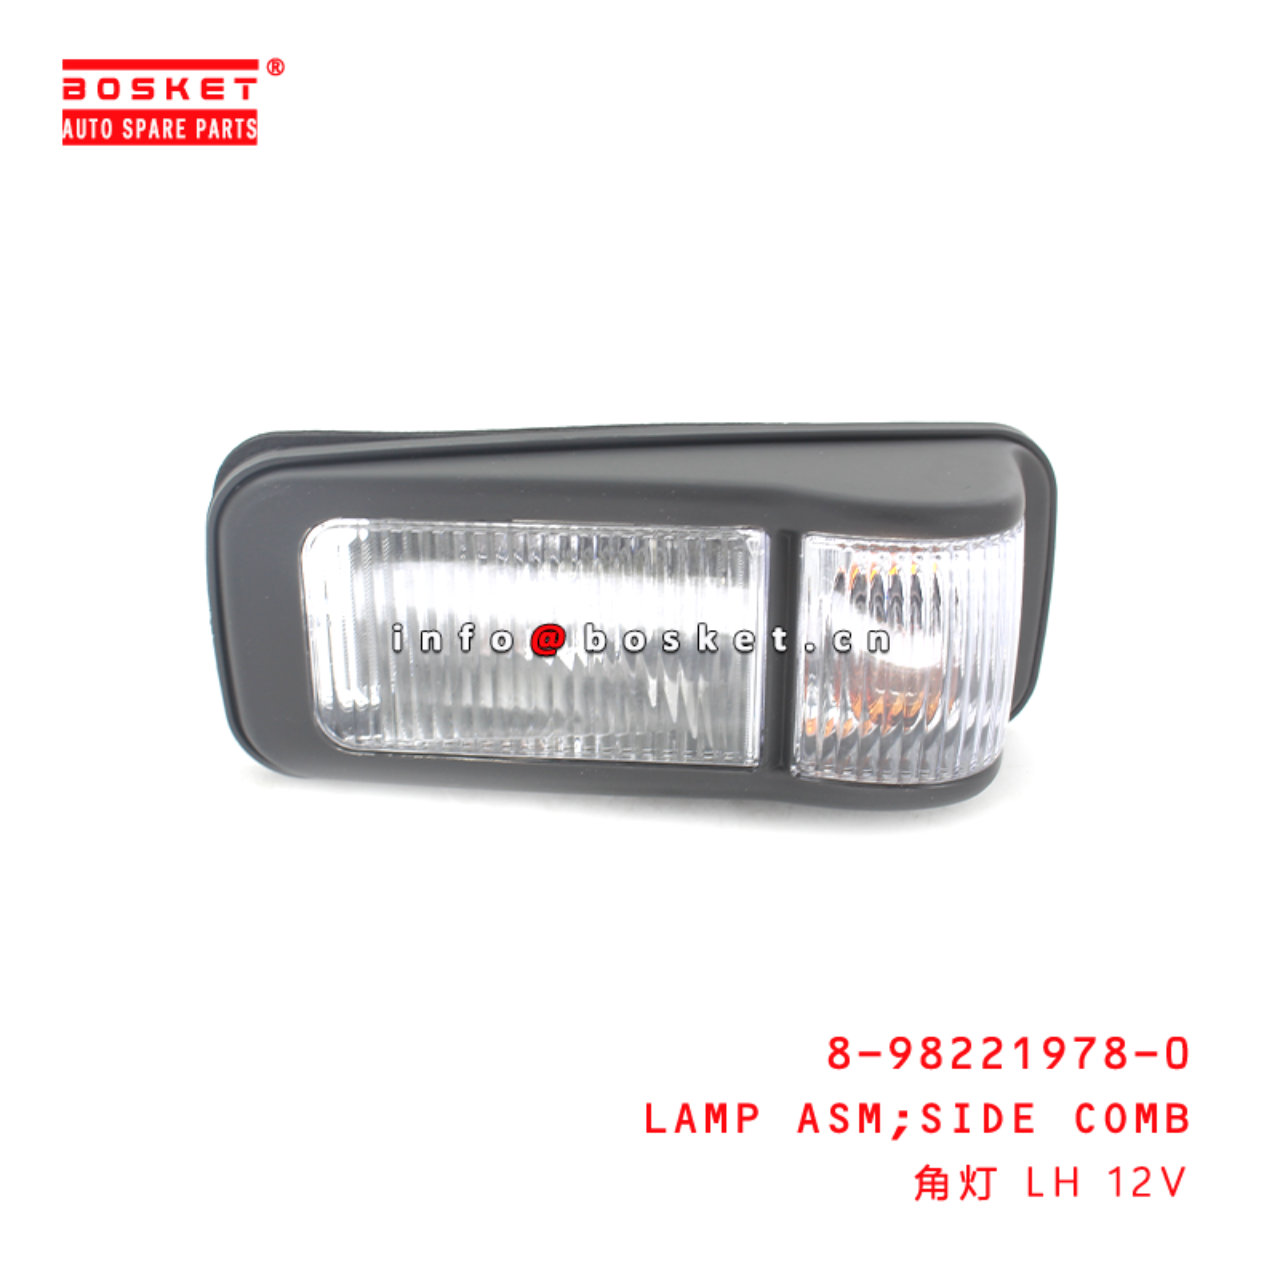 8-98221978-0 Side Combination Lamp Assembly Suitable for ISUZU NLR 8982219780